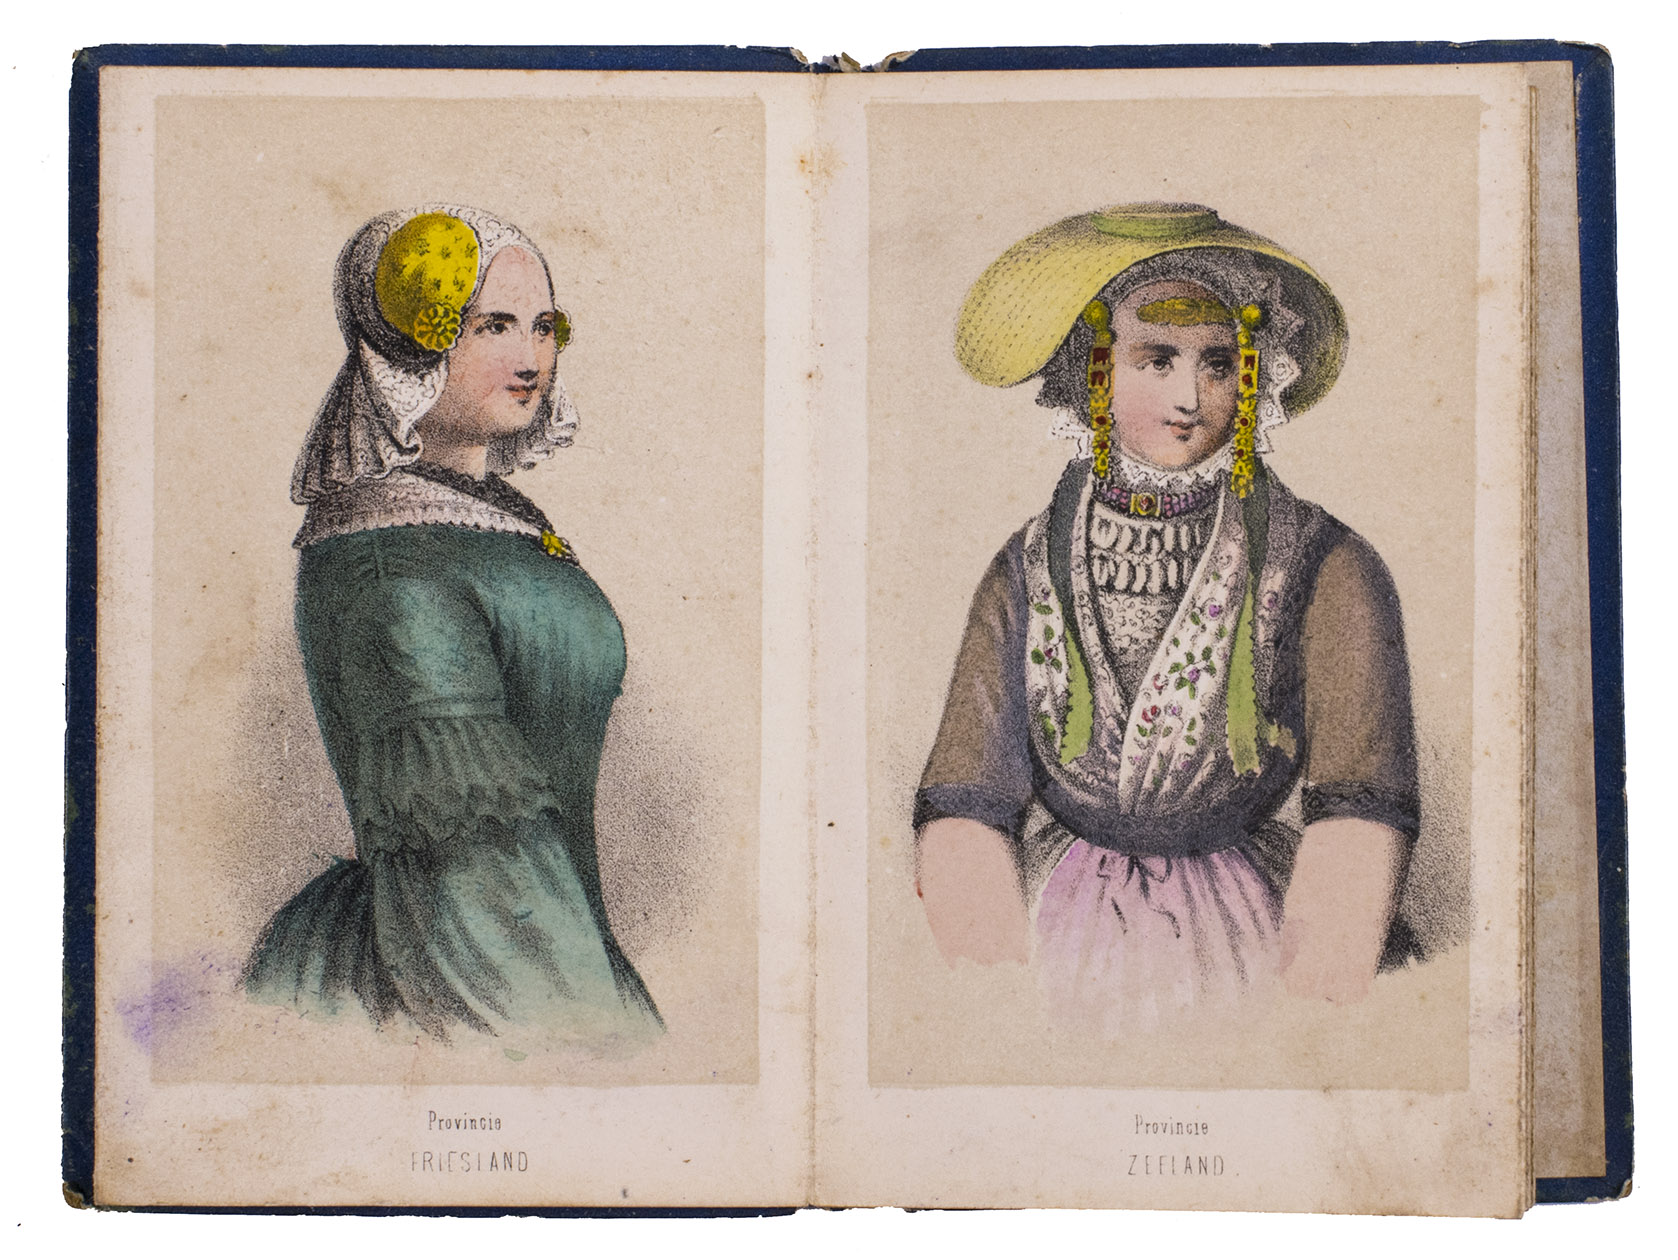 [COSTUMES - NETHERLANDS]. - Kleederdragten en typen der bewoners van Nederland.Amsterdam, P.G. van Lom, [1863?]. Accordion-folded print series (10.5 x 6.5 cm), with 16 tinted lithographed plates, publisher's colouring and heightened with gum arabic. Publisher's original boards, with title on front.